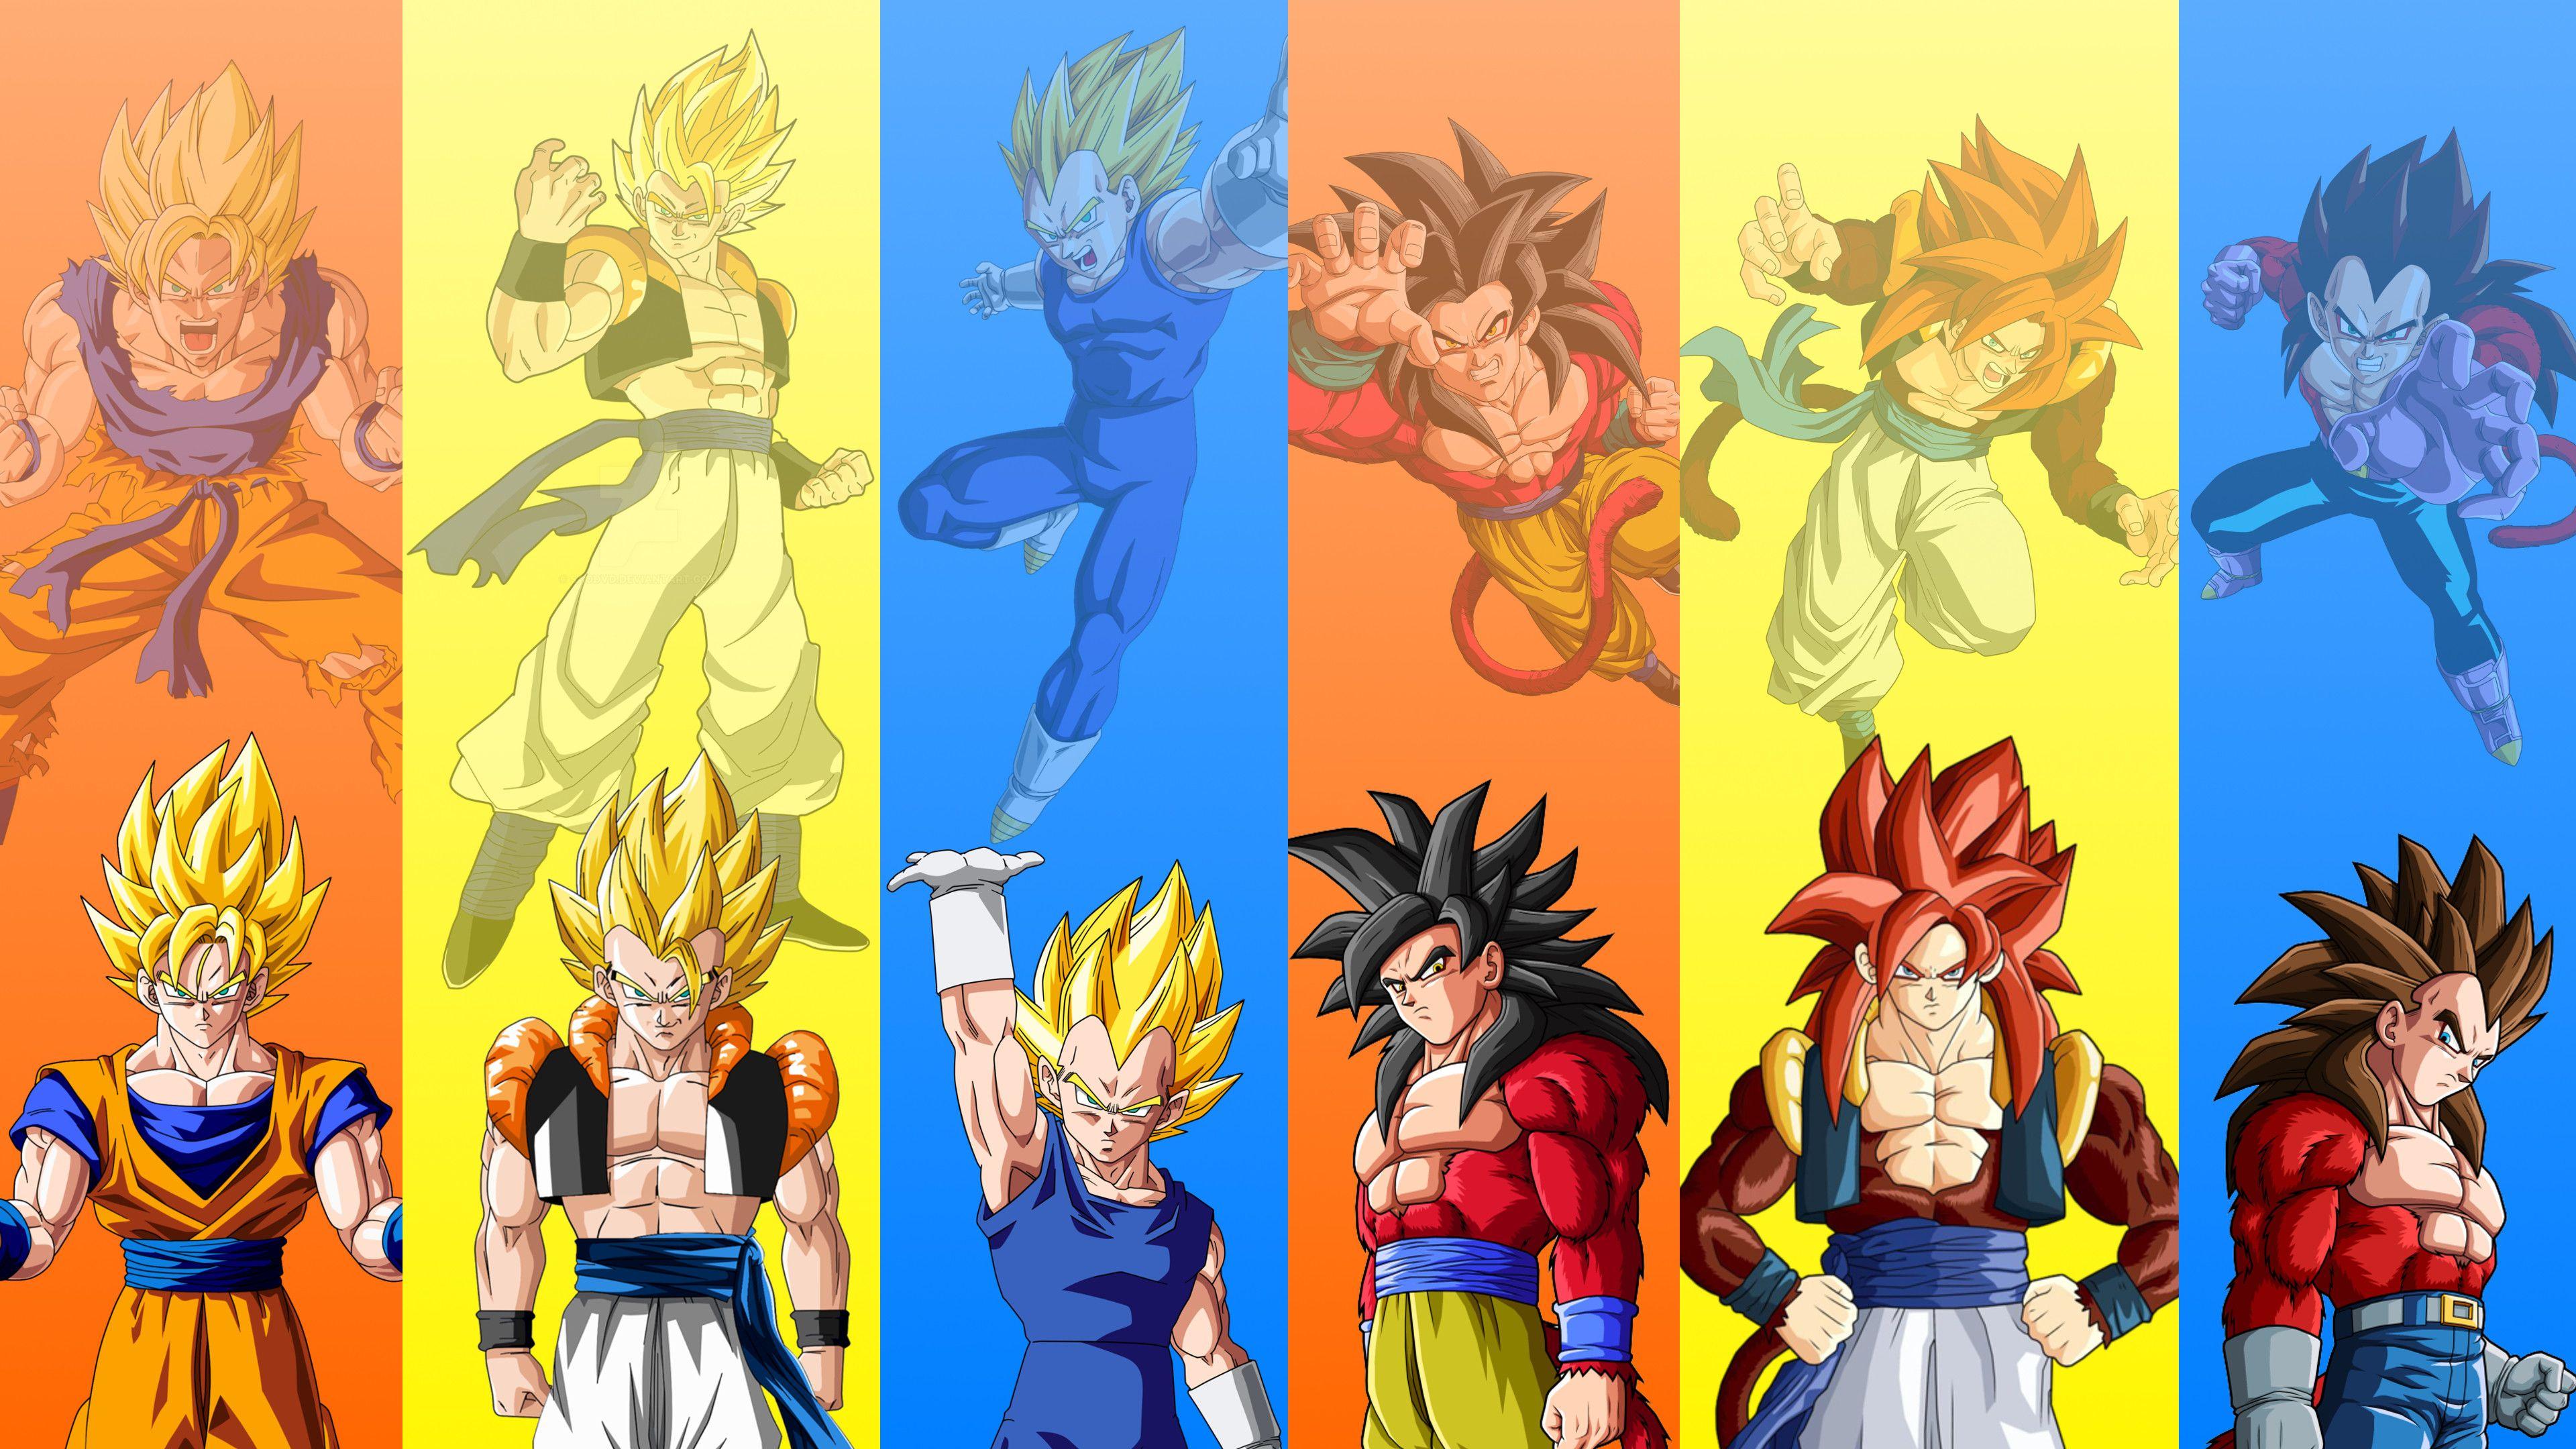 Finished a 4K image that features 45 DBZ Villians and Forms Raditz